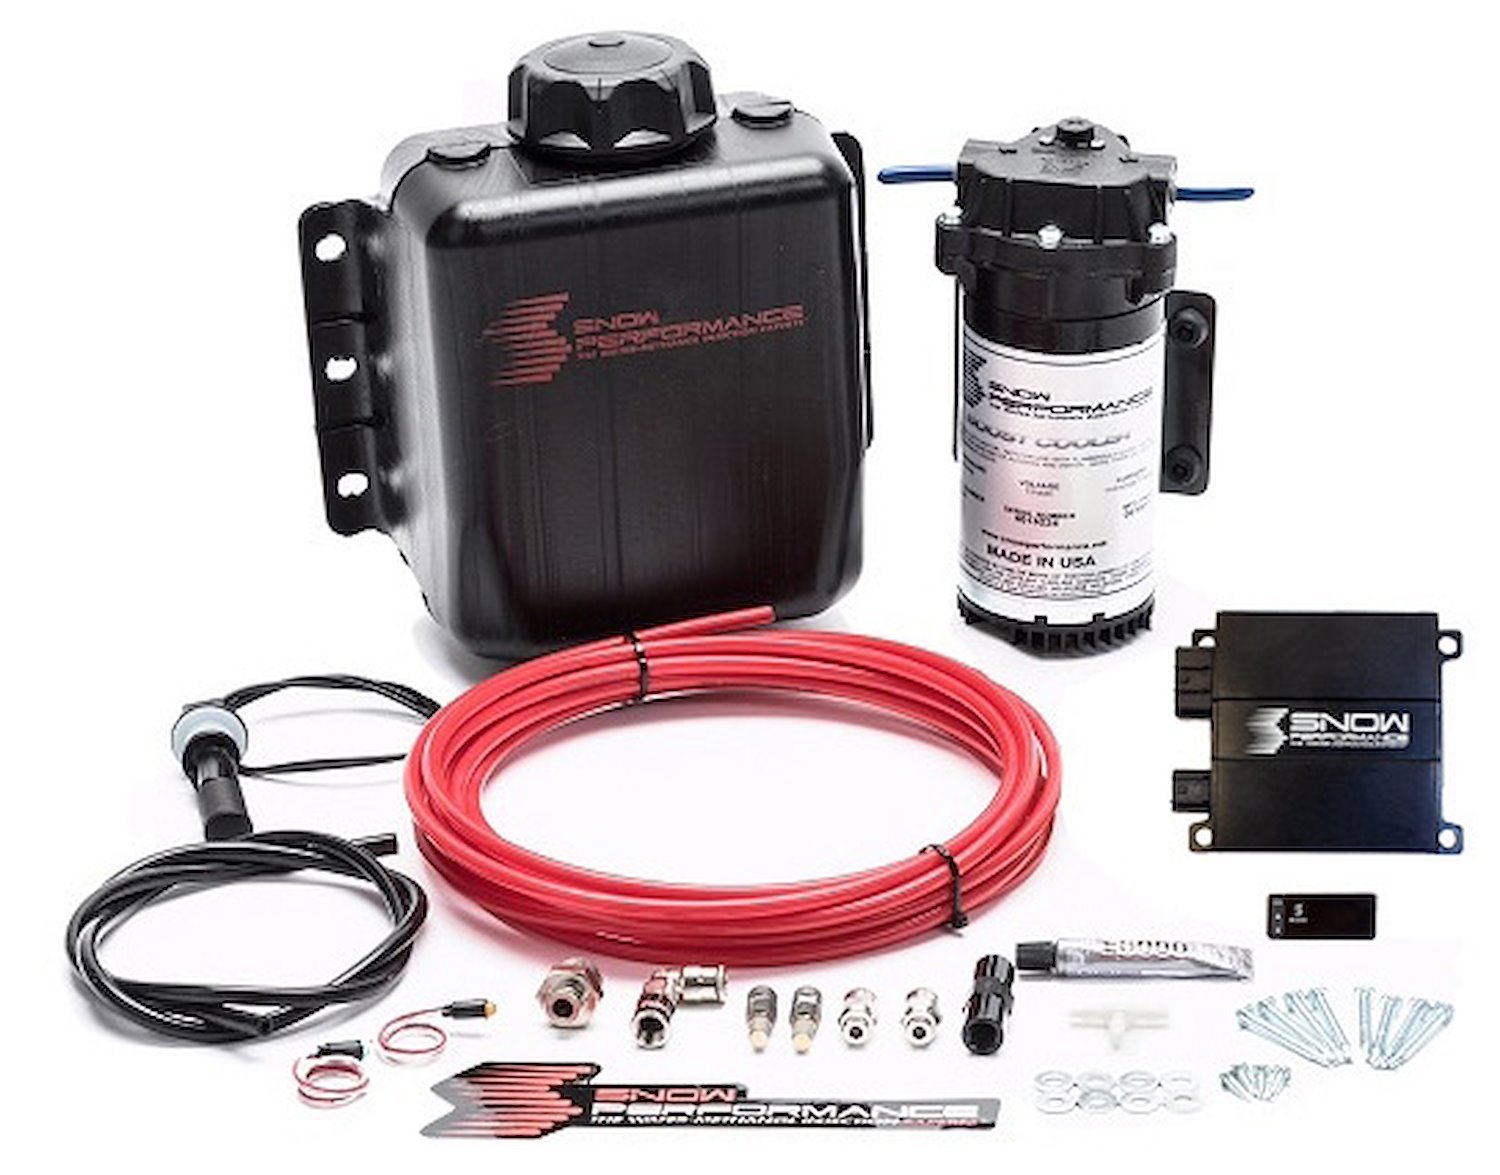 Stage 2 Water/Methanol Injection Kits